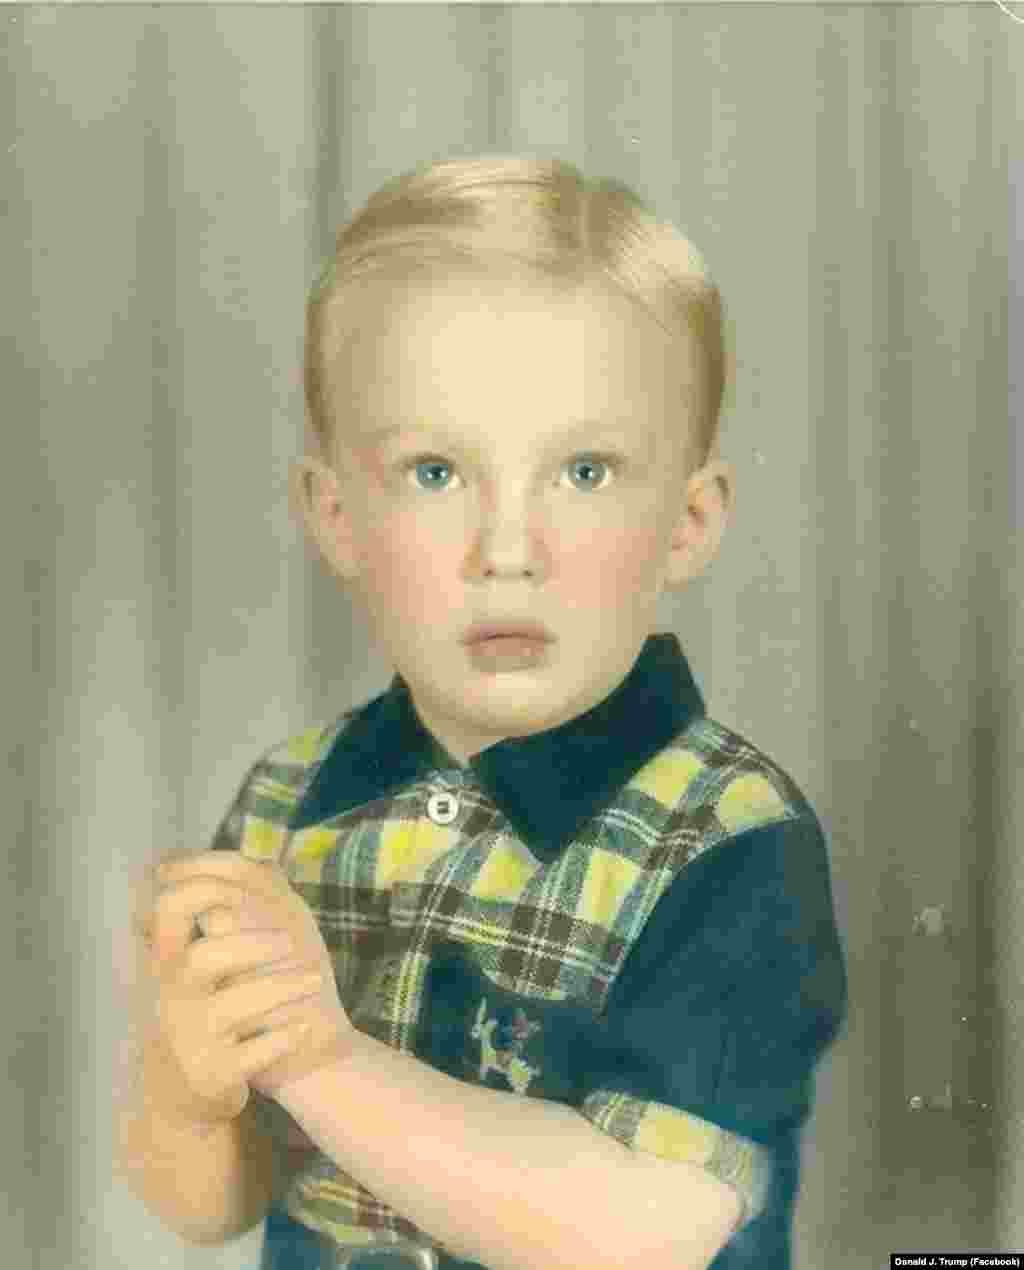 Donald Trump was born into a wealthy New York family in 1946. (undated photo)